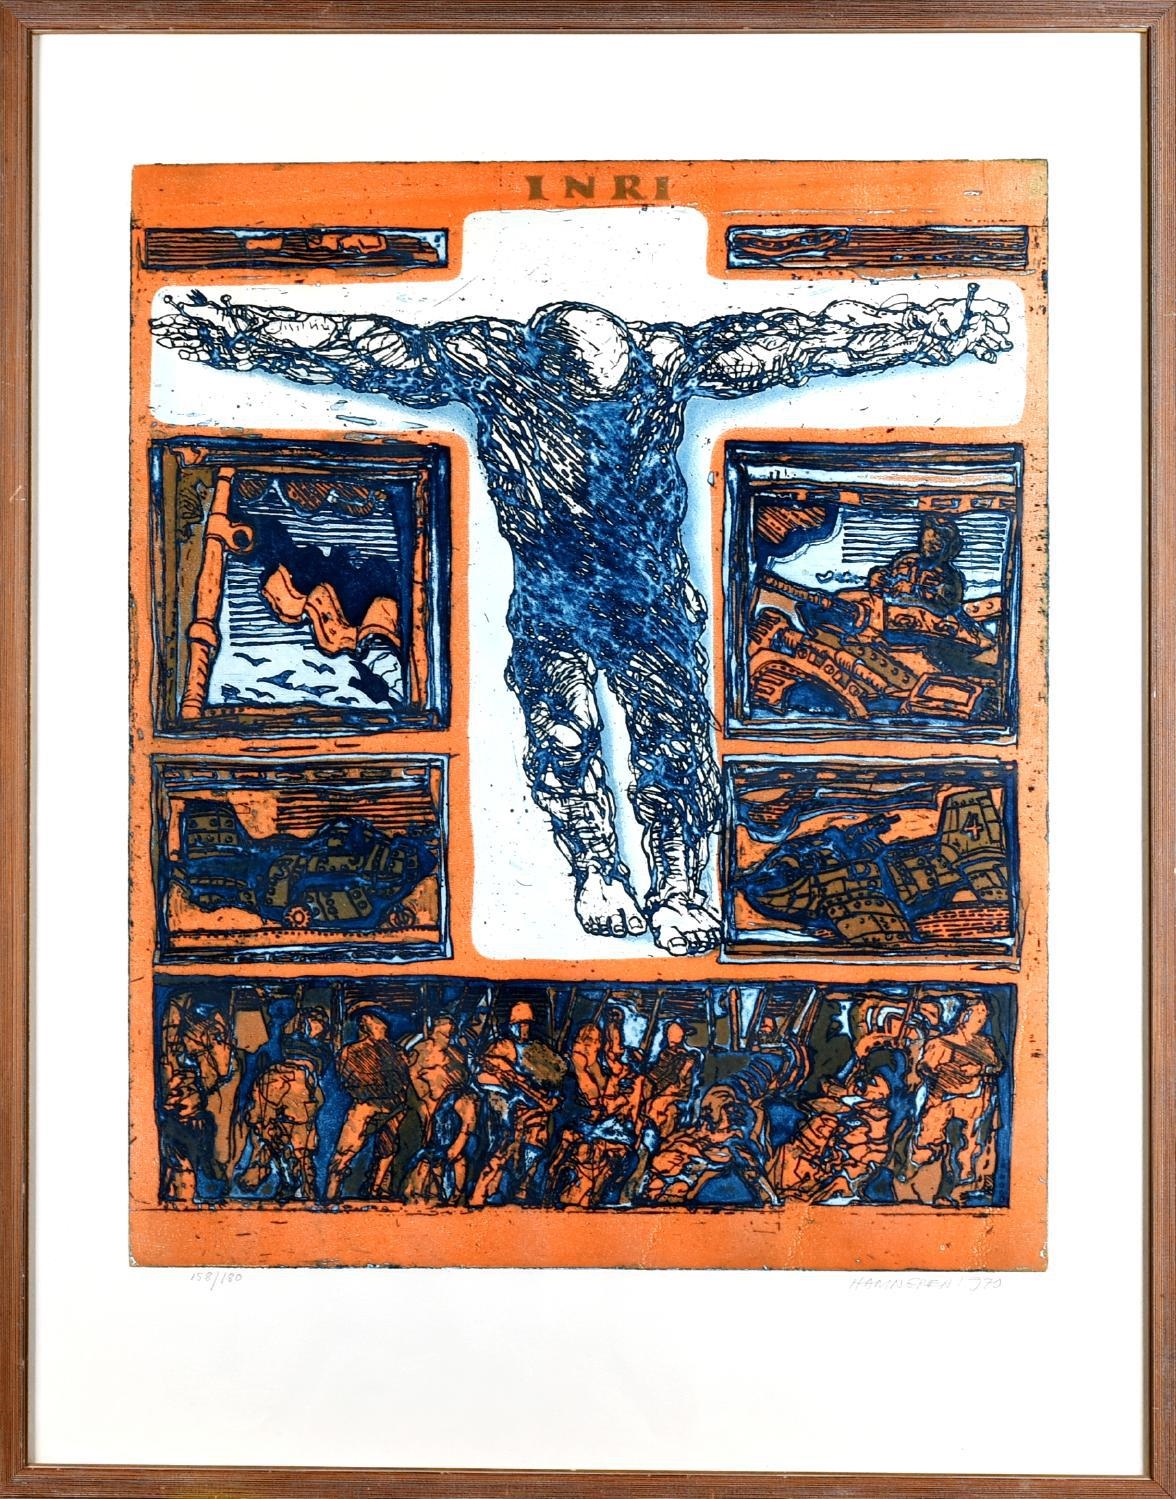 Artwork by Hans Hamngren, Inri, Made of Color Lithograph